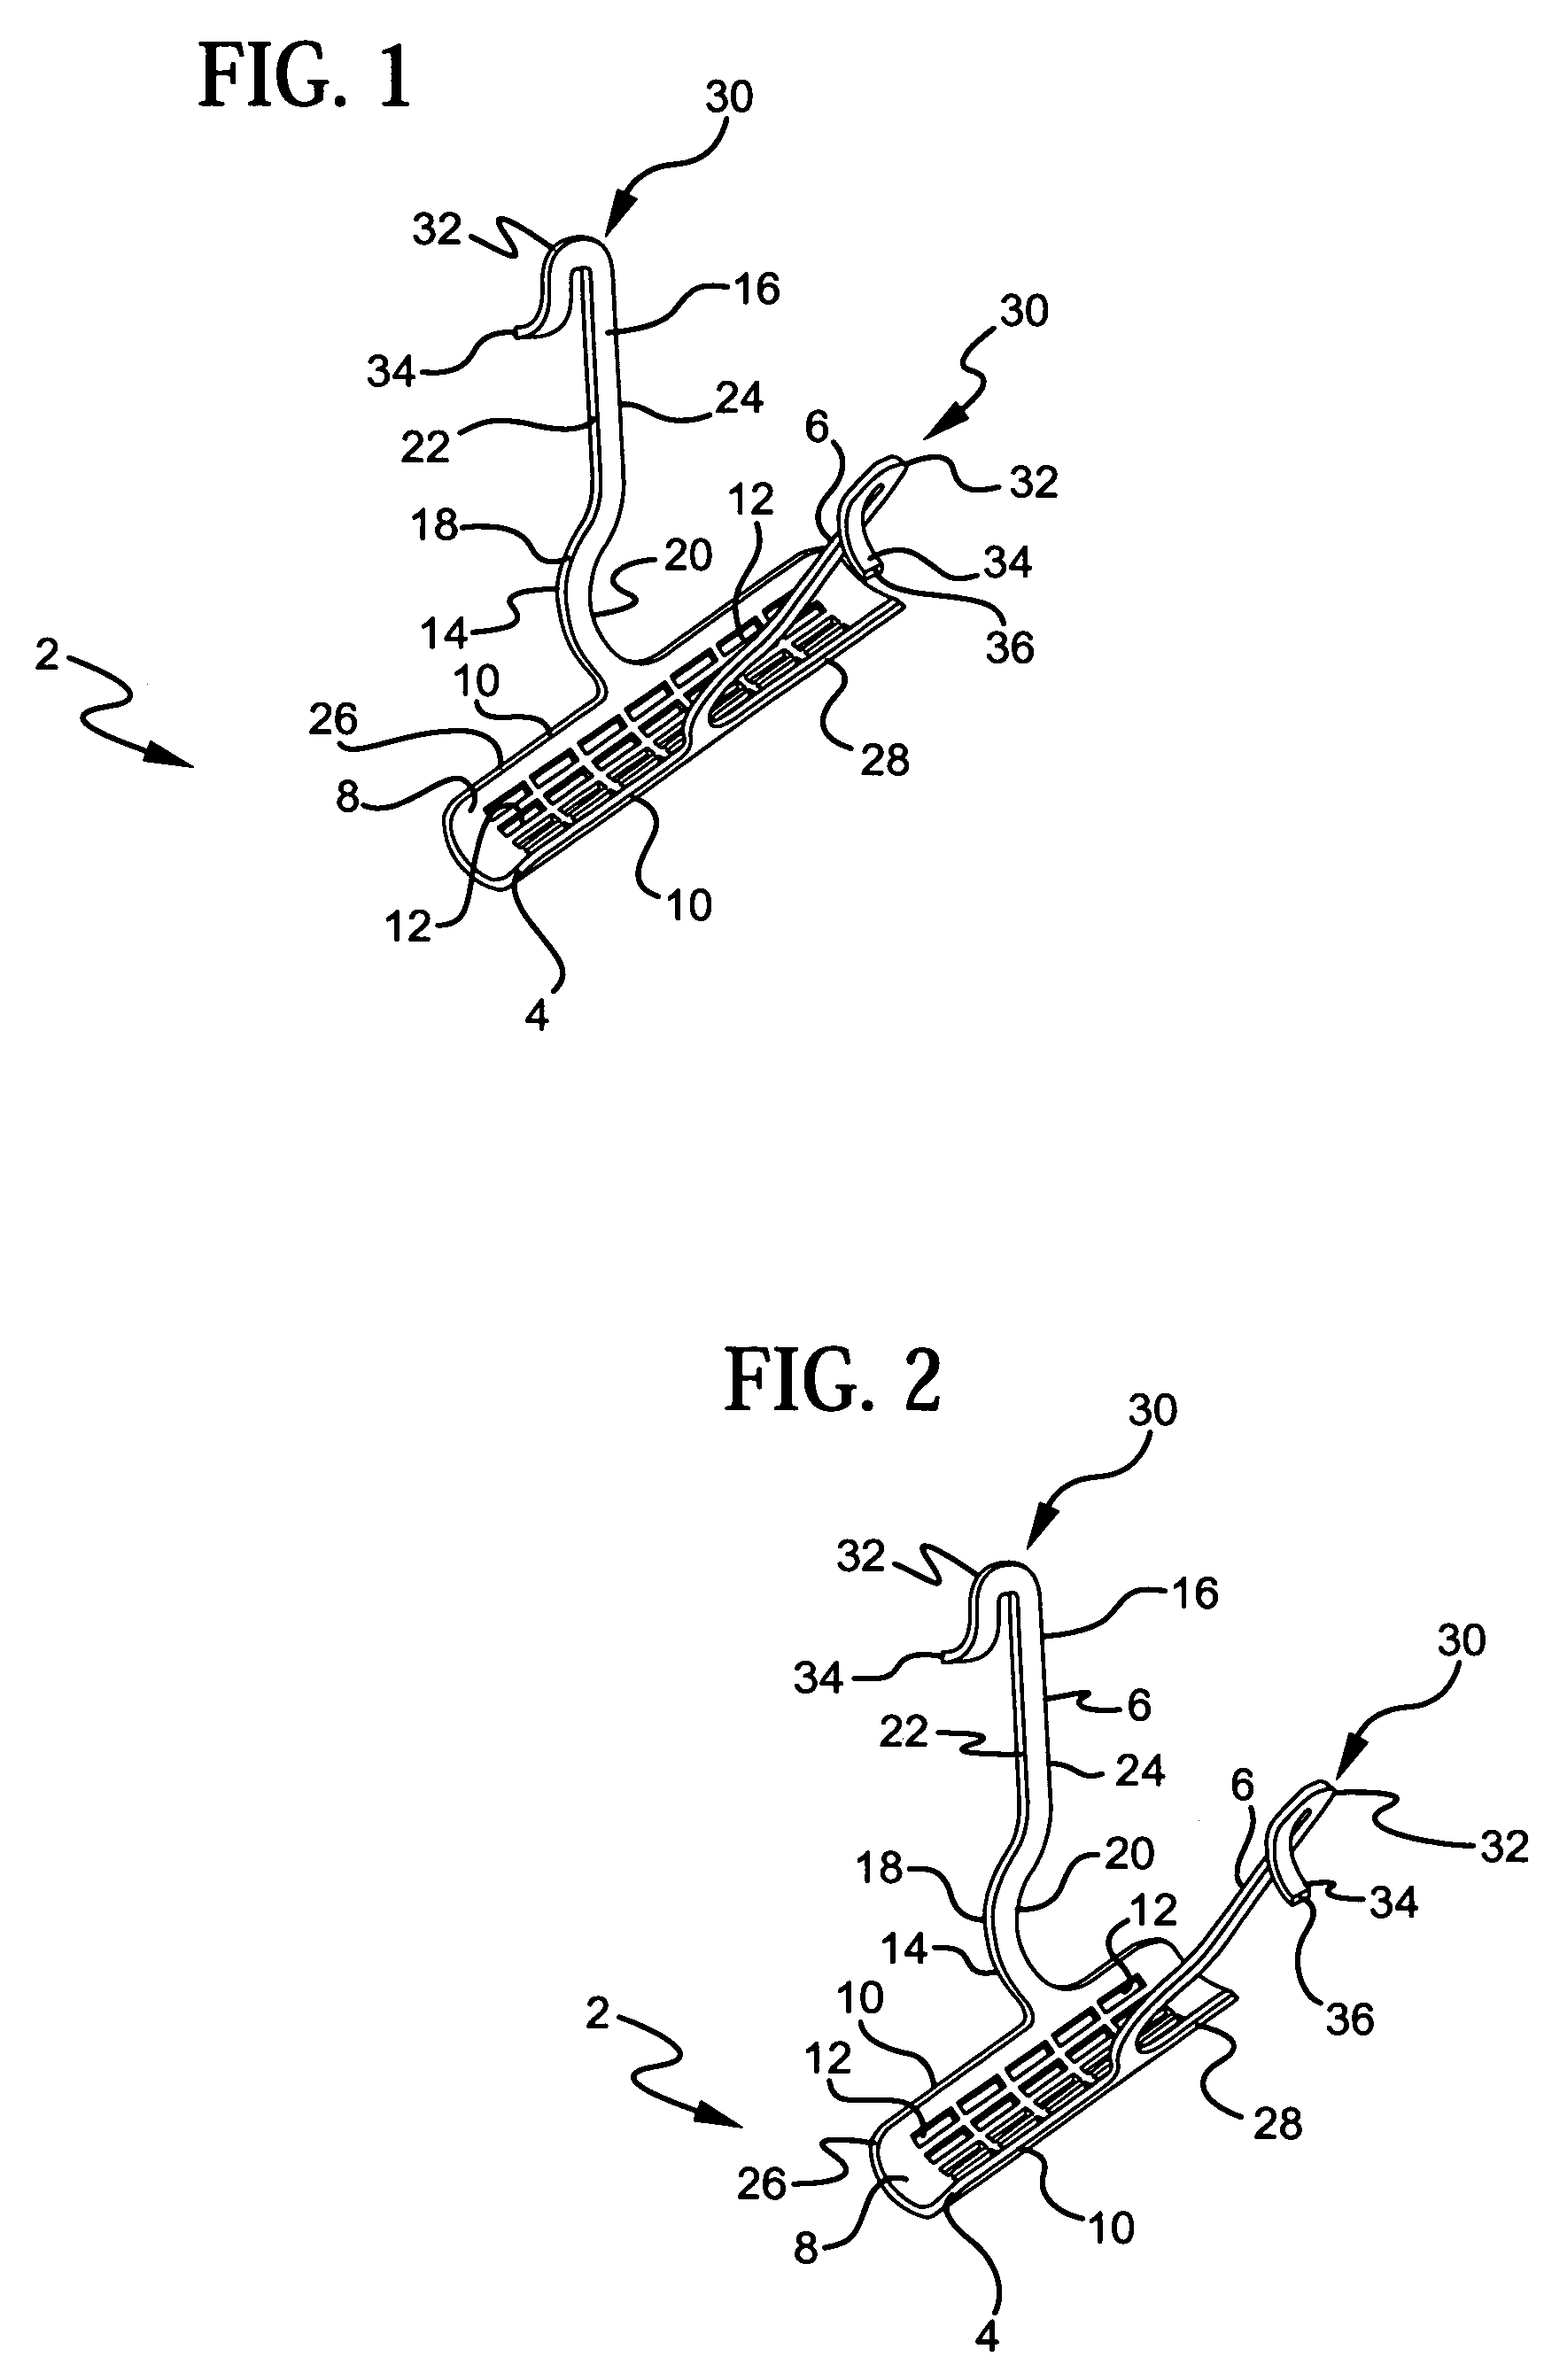 Stress urinary incontinence implant and device for deploying same